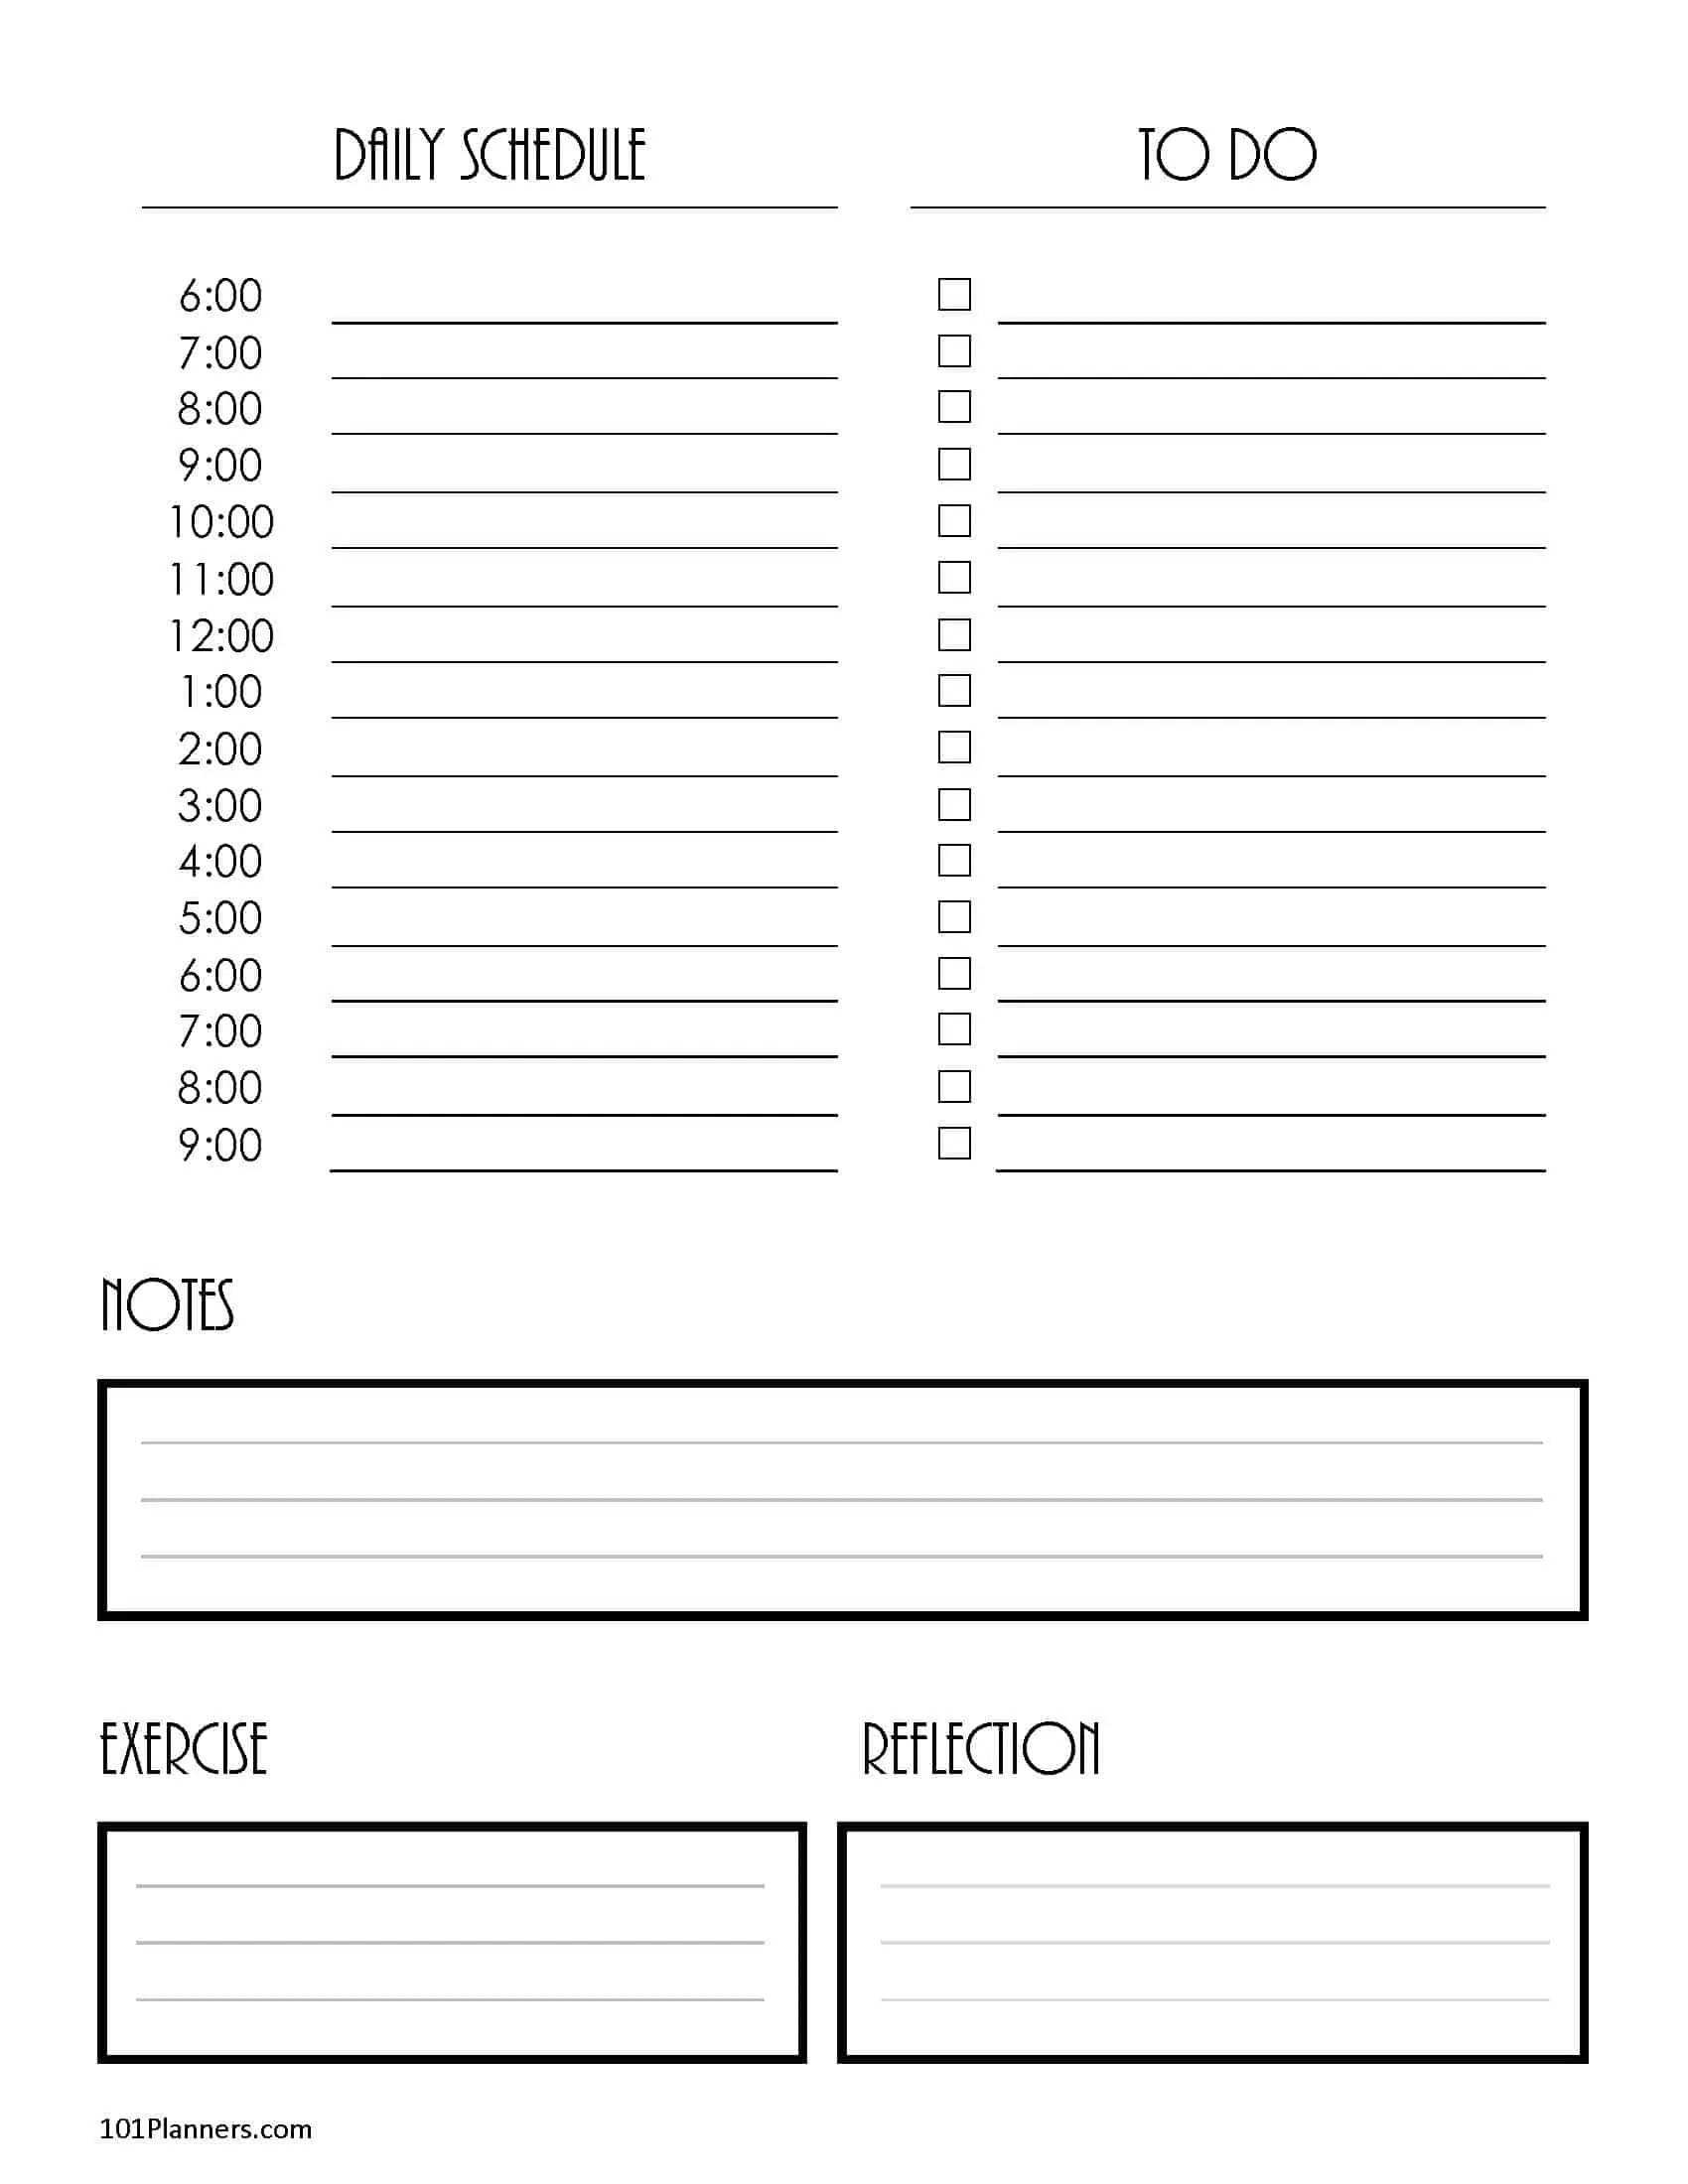 Daily Planner Notes. Digital and Printable Priorities Goal To Do List Schedule Editable weekly digital planner Weekly Planner